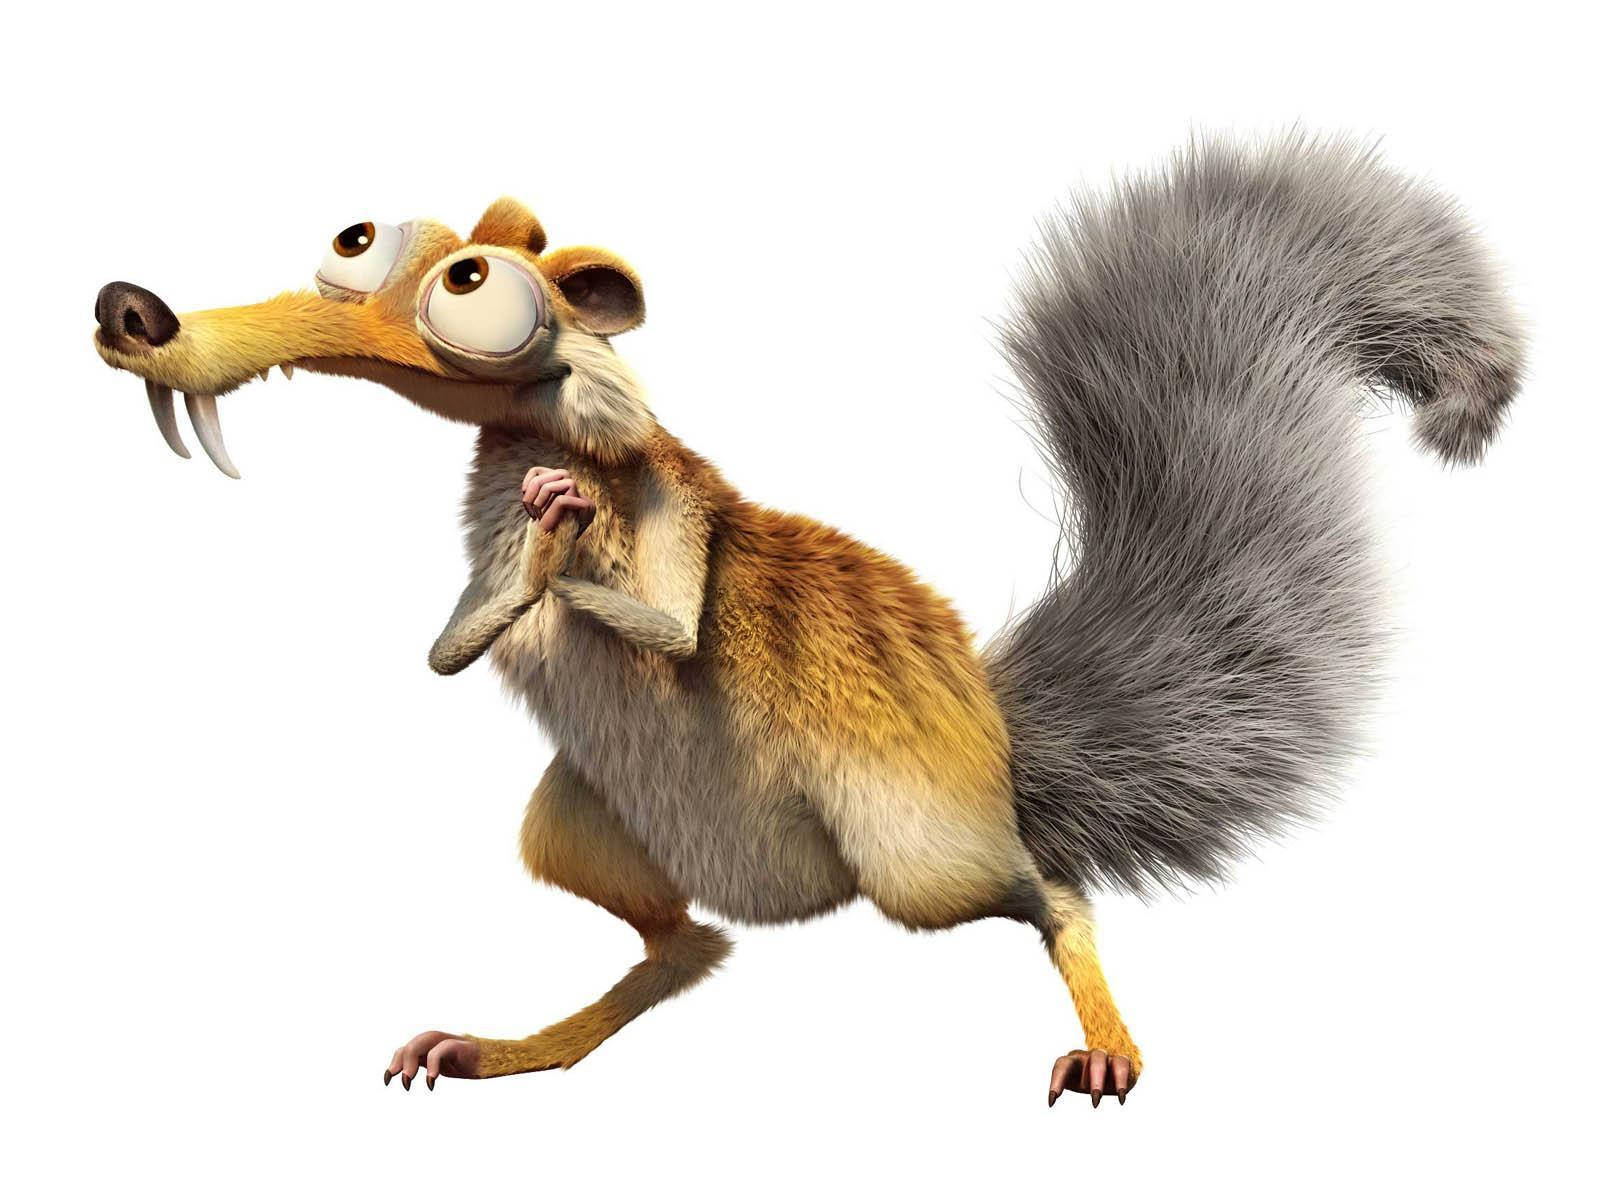 Caption: Scrat Chasing the Ever Elusive Acorn in Ice Age Wallpaper